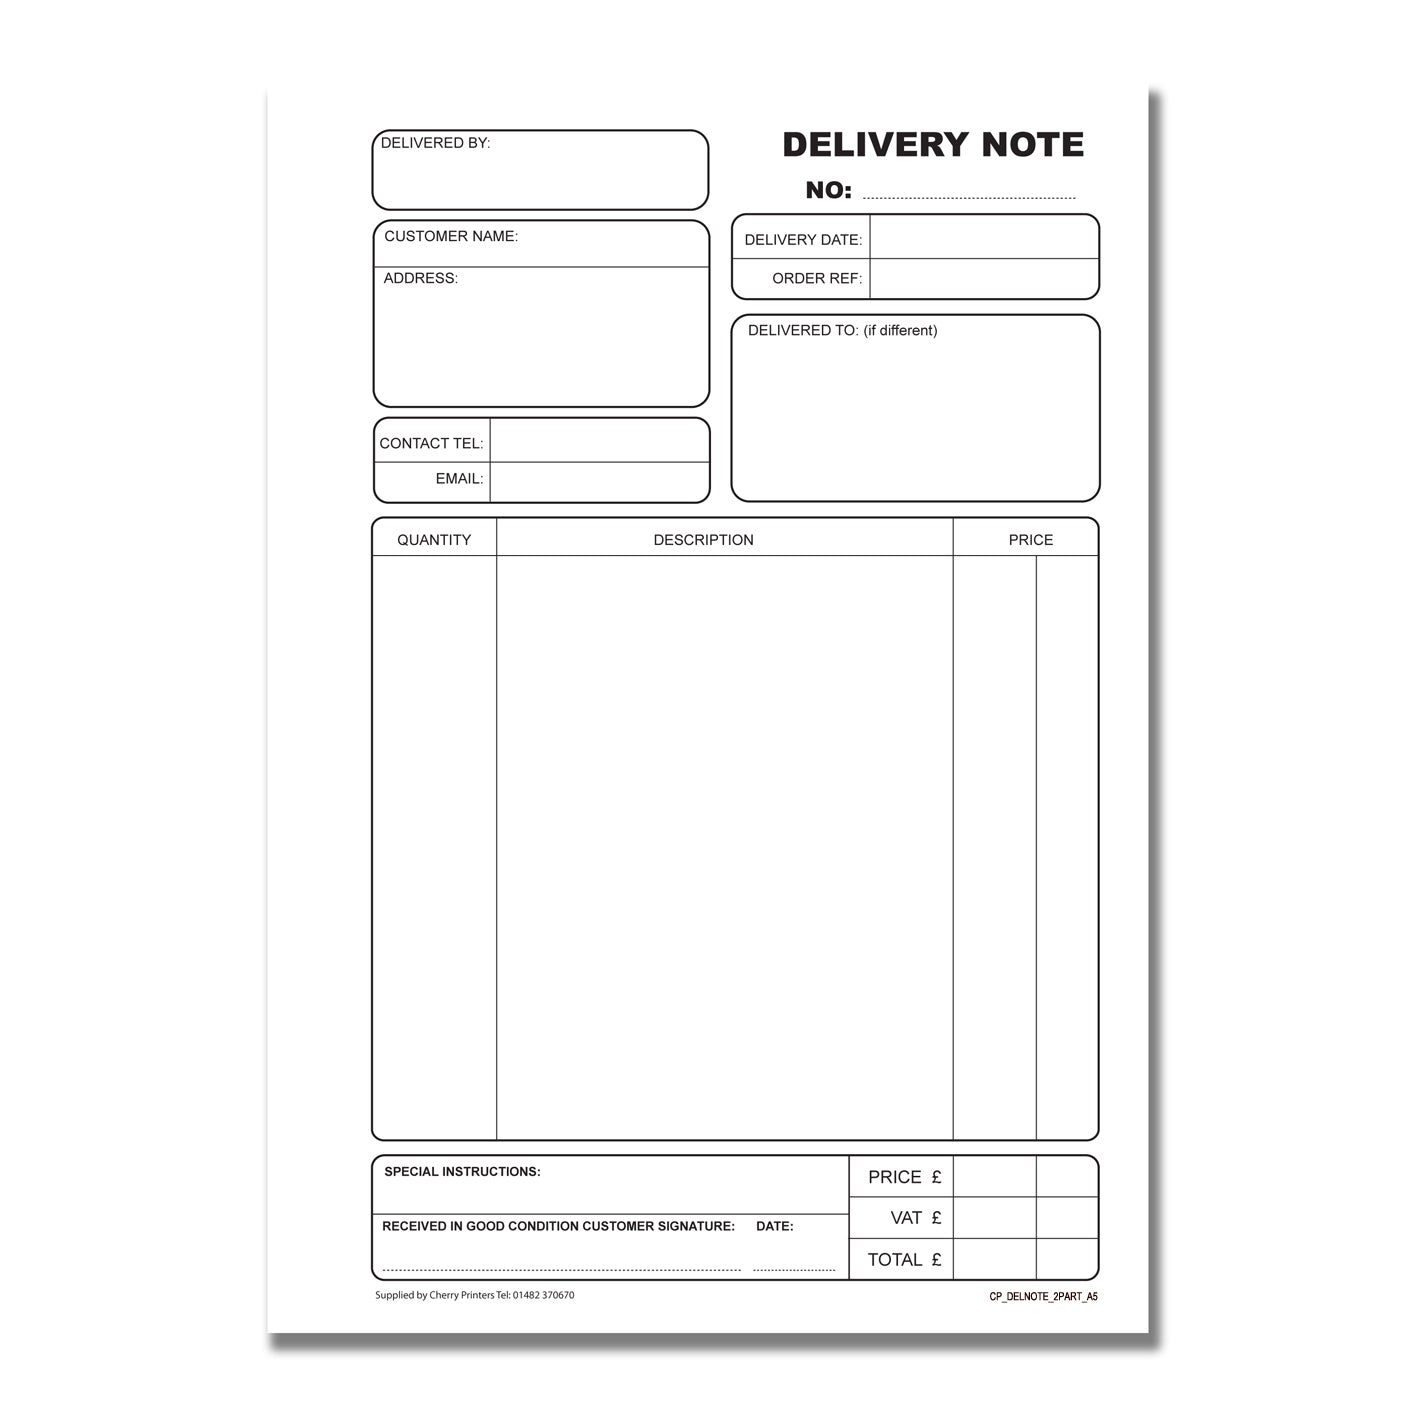 NCR Delivery Note Duplicate Book A5